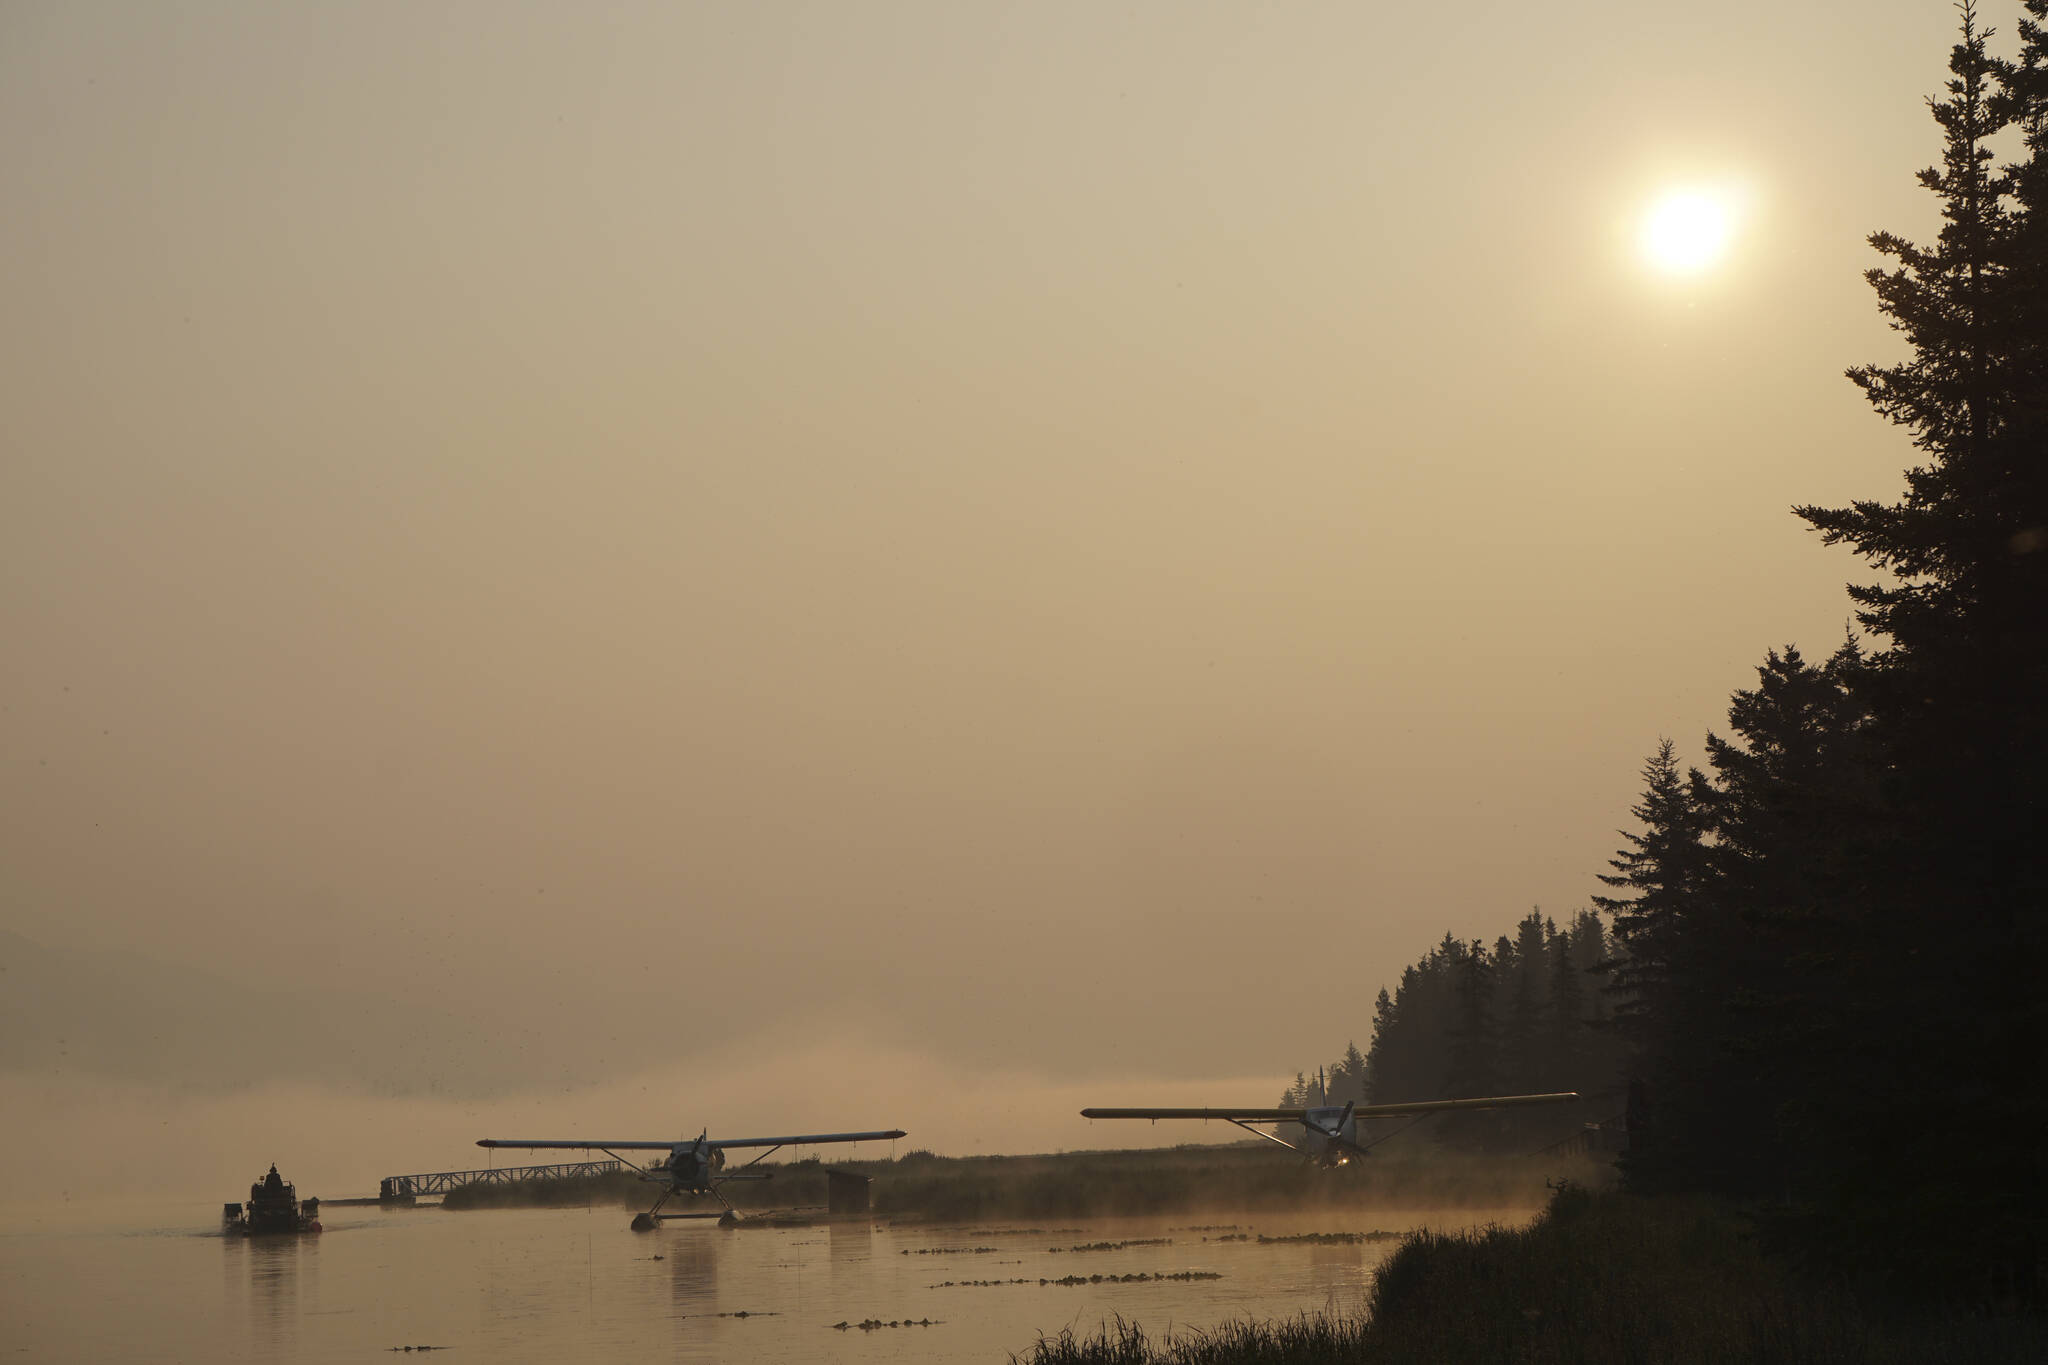 Smoke from wildfires in Southwestern Alaska casts a pall over Beluga Lake on Wednesday morning, June 29, 2022, in Homer, Alaska. (Photo by Michael Armstrong/Homer News)